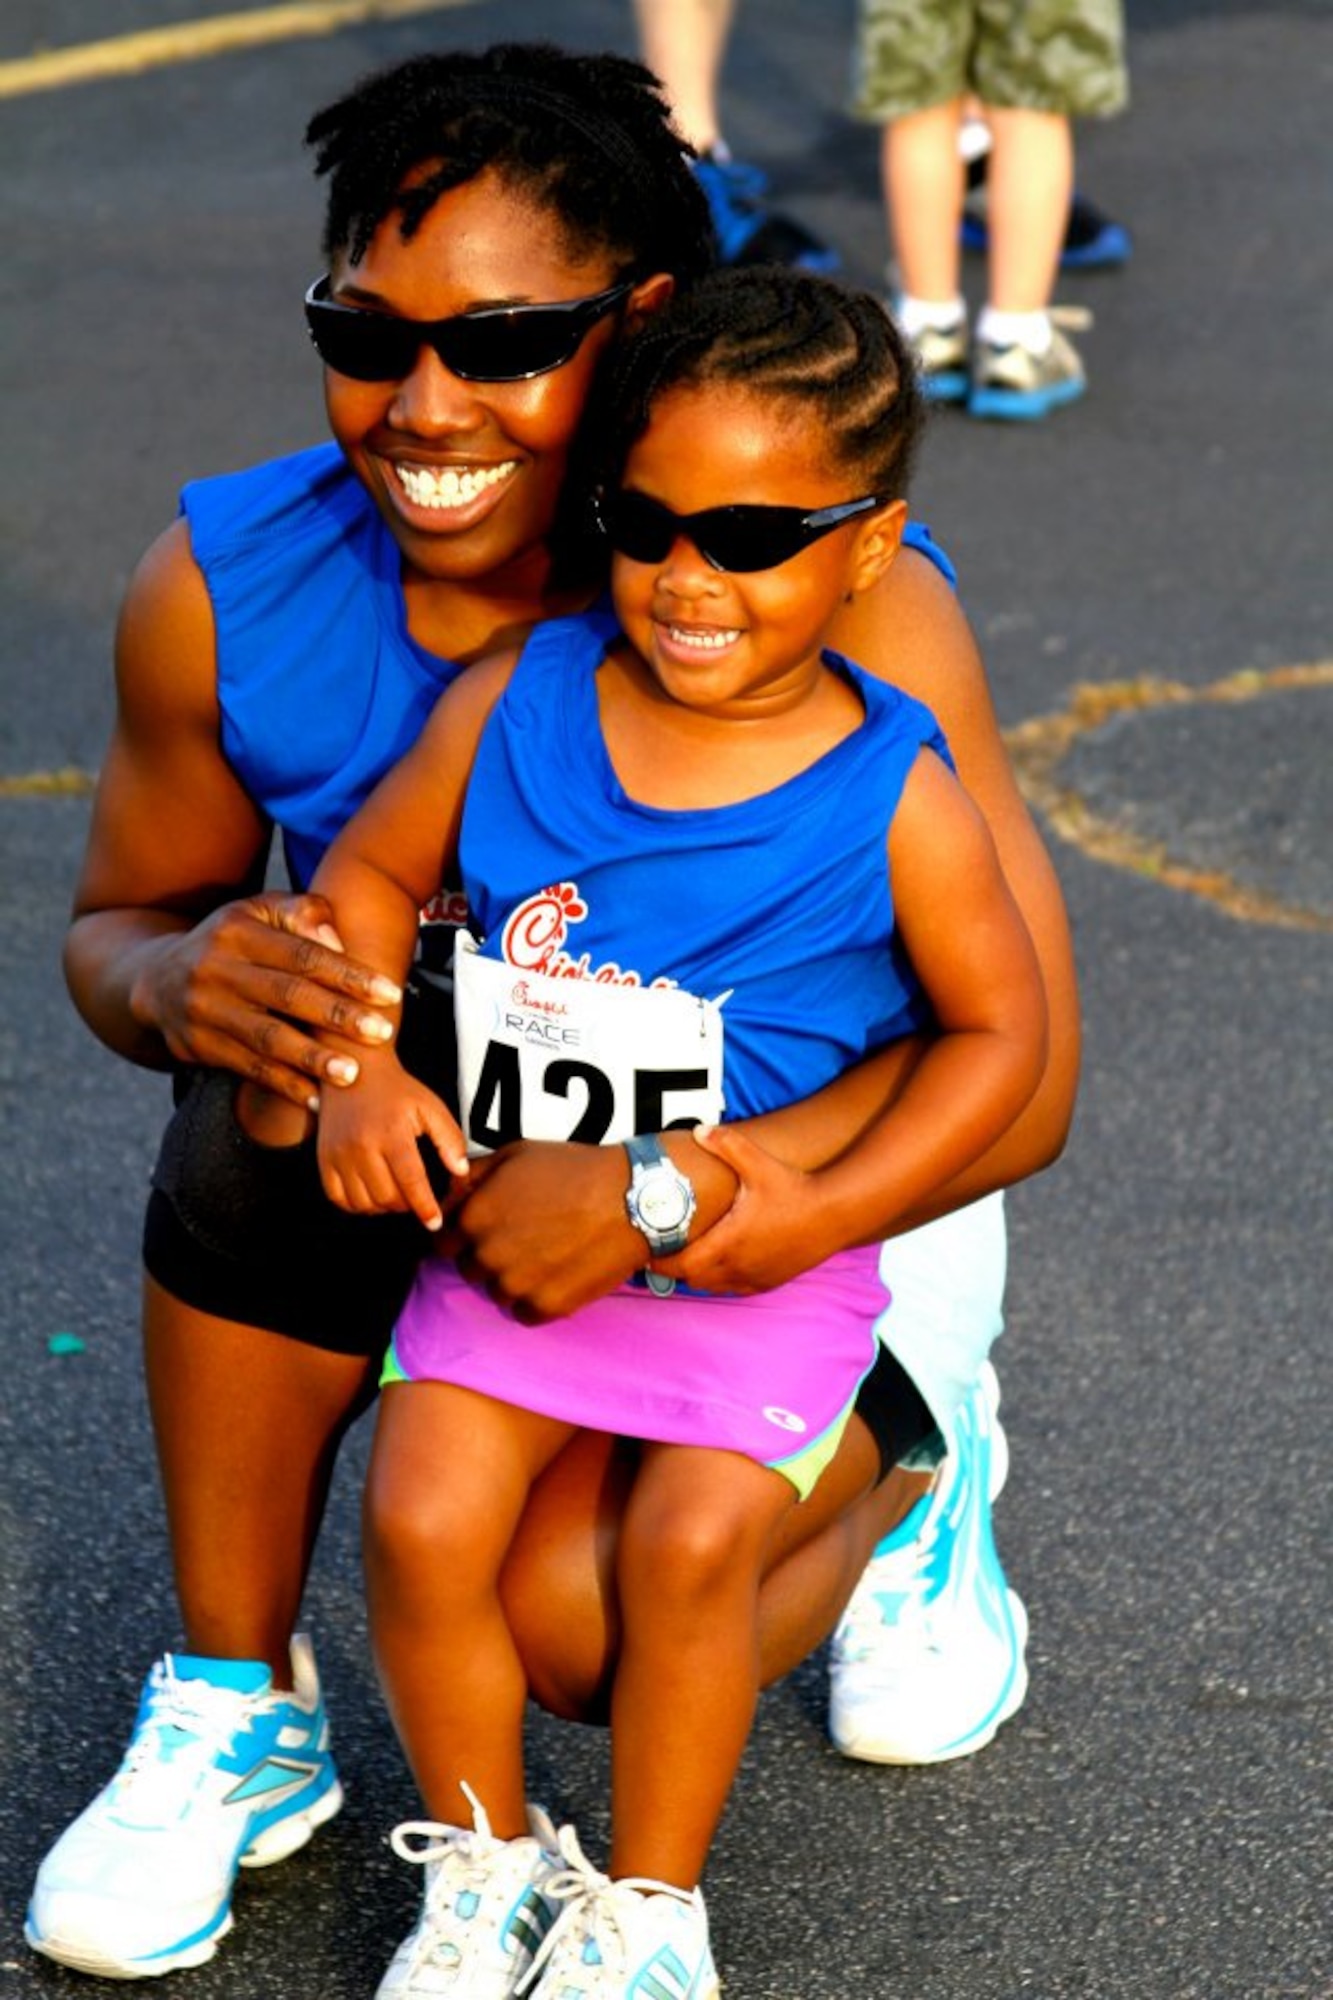 Tech. Sgt. Curnita Brisby, First-Term Airman Center NCO in charge, poses with her daughter, Joy Brisby, 6, after a race. Brisby and her daughter run together constantly and have participated in a number of 5Ks together. Joy motivates her mother to complete her races and was a huge support system from  home as Brisby completed the Air Force Marathon. (Courtesy photo)